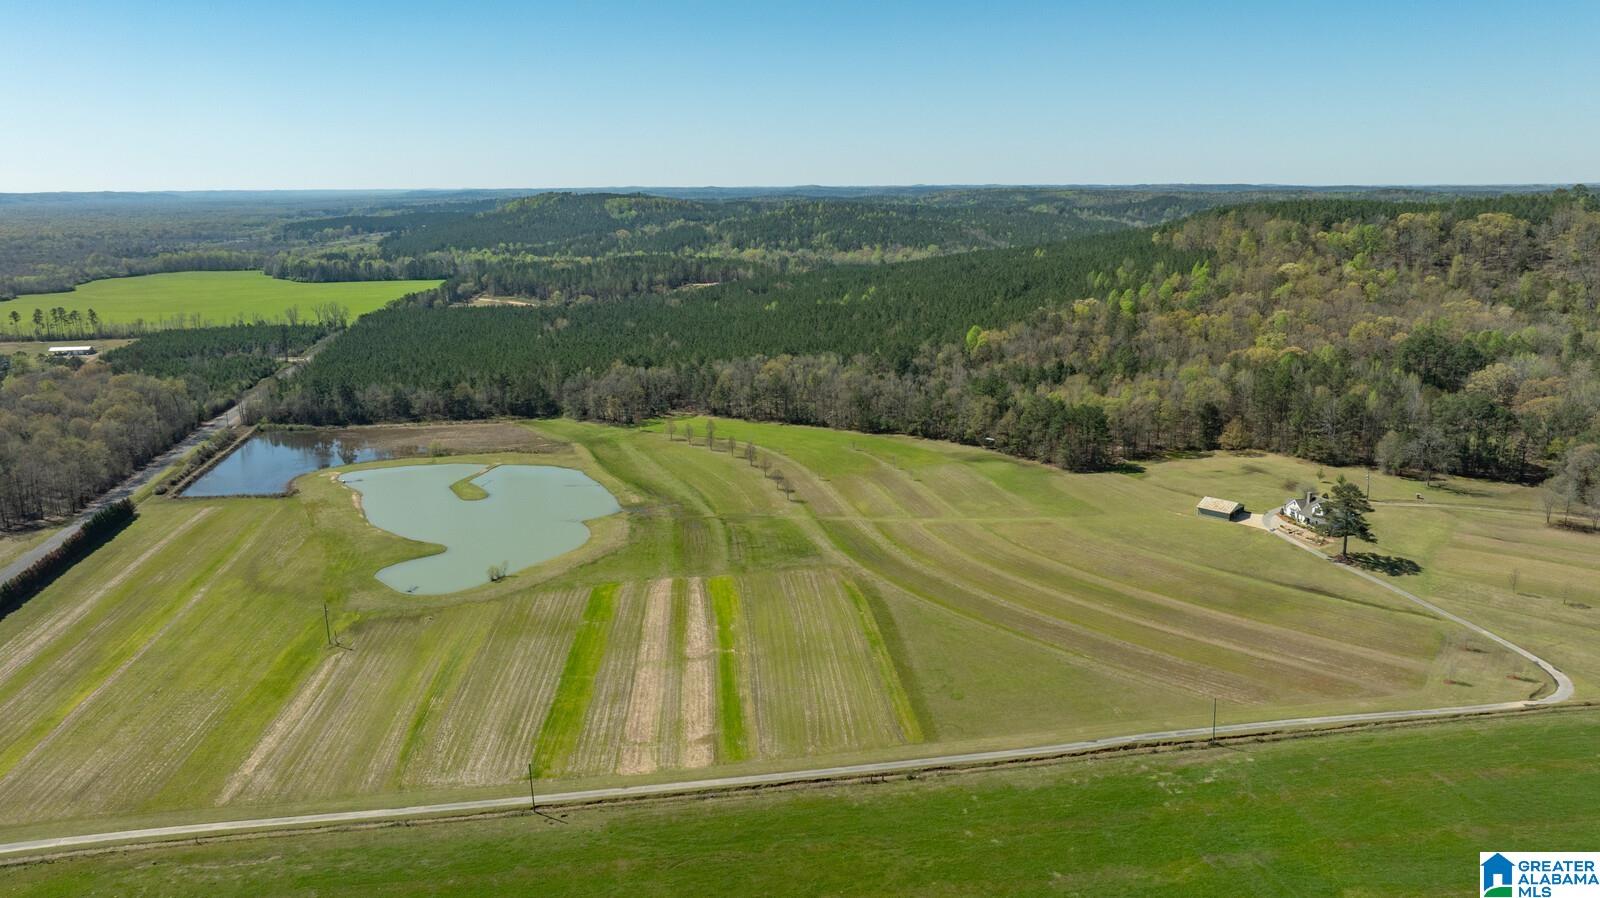 Acreage includes the additional Parcel 17-02-04-0-000-003.000 The owners have spared no expense customizing this gated 178+- acre estate in North Tuscaloosa County,30 minutes to the heart of Tuscaloosa. A 2.85 acre lake stocked with bass and bream, 2 acre duck impoundment stocked with crawfish, wildlife food plots, 5 green fields & hunting blinds & 2 miles of well maintained trails to access hunting areas. Your home offers an open floor plan 4 bedroom 3.5 bath built in 2012 with addition added in 2020 offering 2 primary suites on main level and 2 spacious bedrooms upstairs. Spend your evenings relaxing on the custom flagstone patio or screen porch surrounded by detailed landscape.178 +- acres(35 acres open flat land,19 acres of hardwoods,118 acres of pine plantation roughly 20 years old)